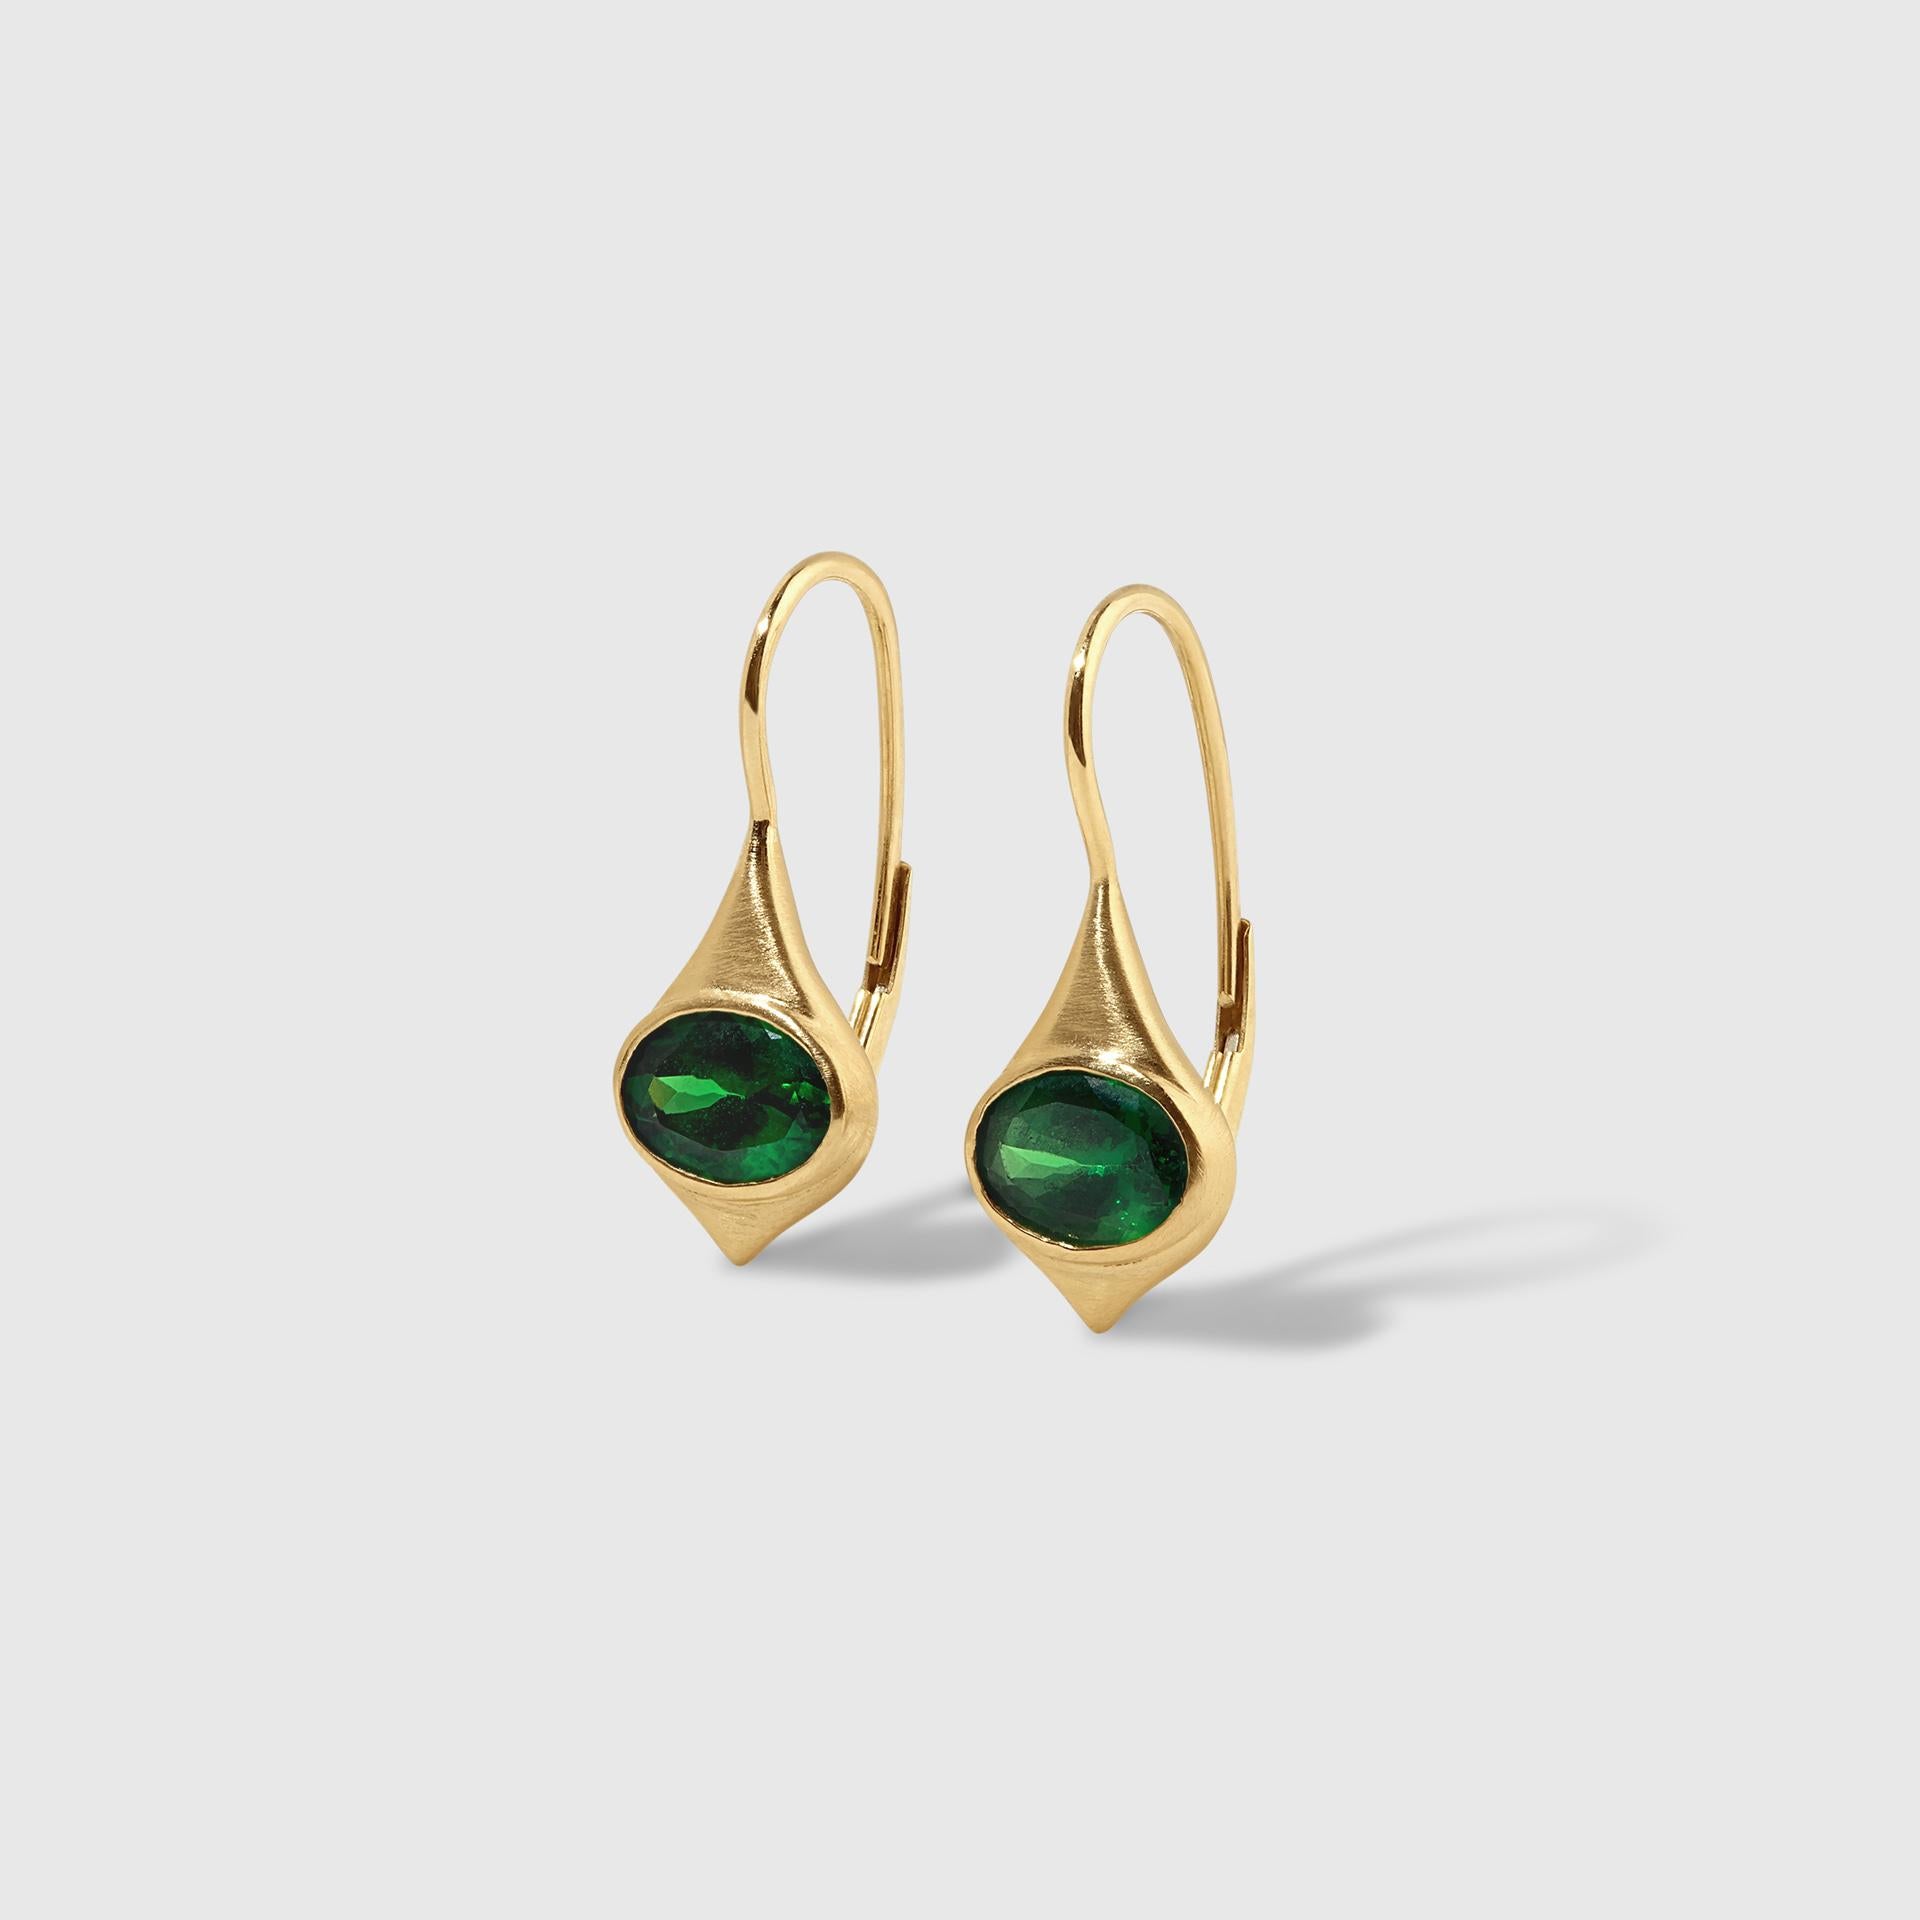 Contemporary Droplette Earrings with East-West Bright Green, Oval Tsavorites, 18kt Gold For Sale